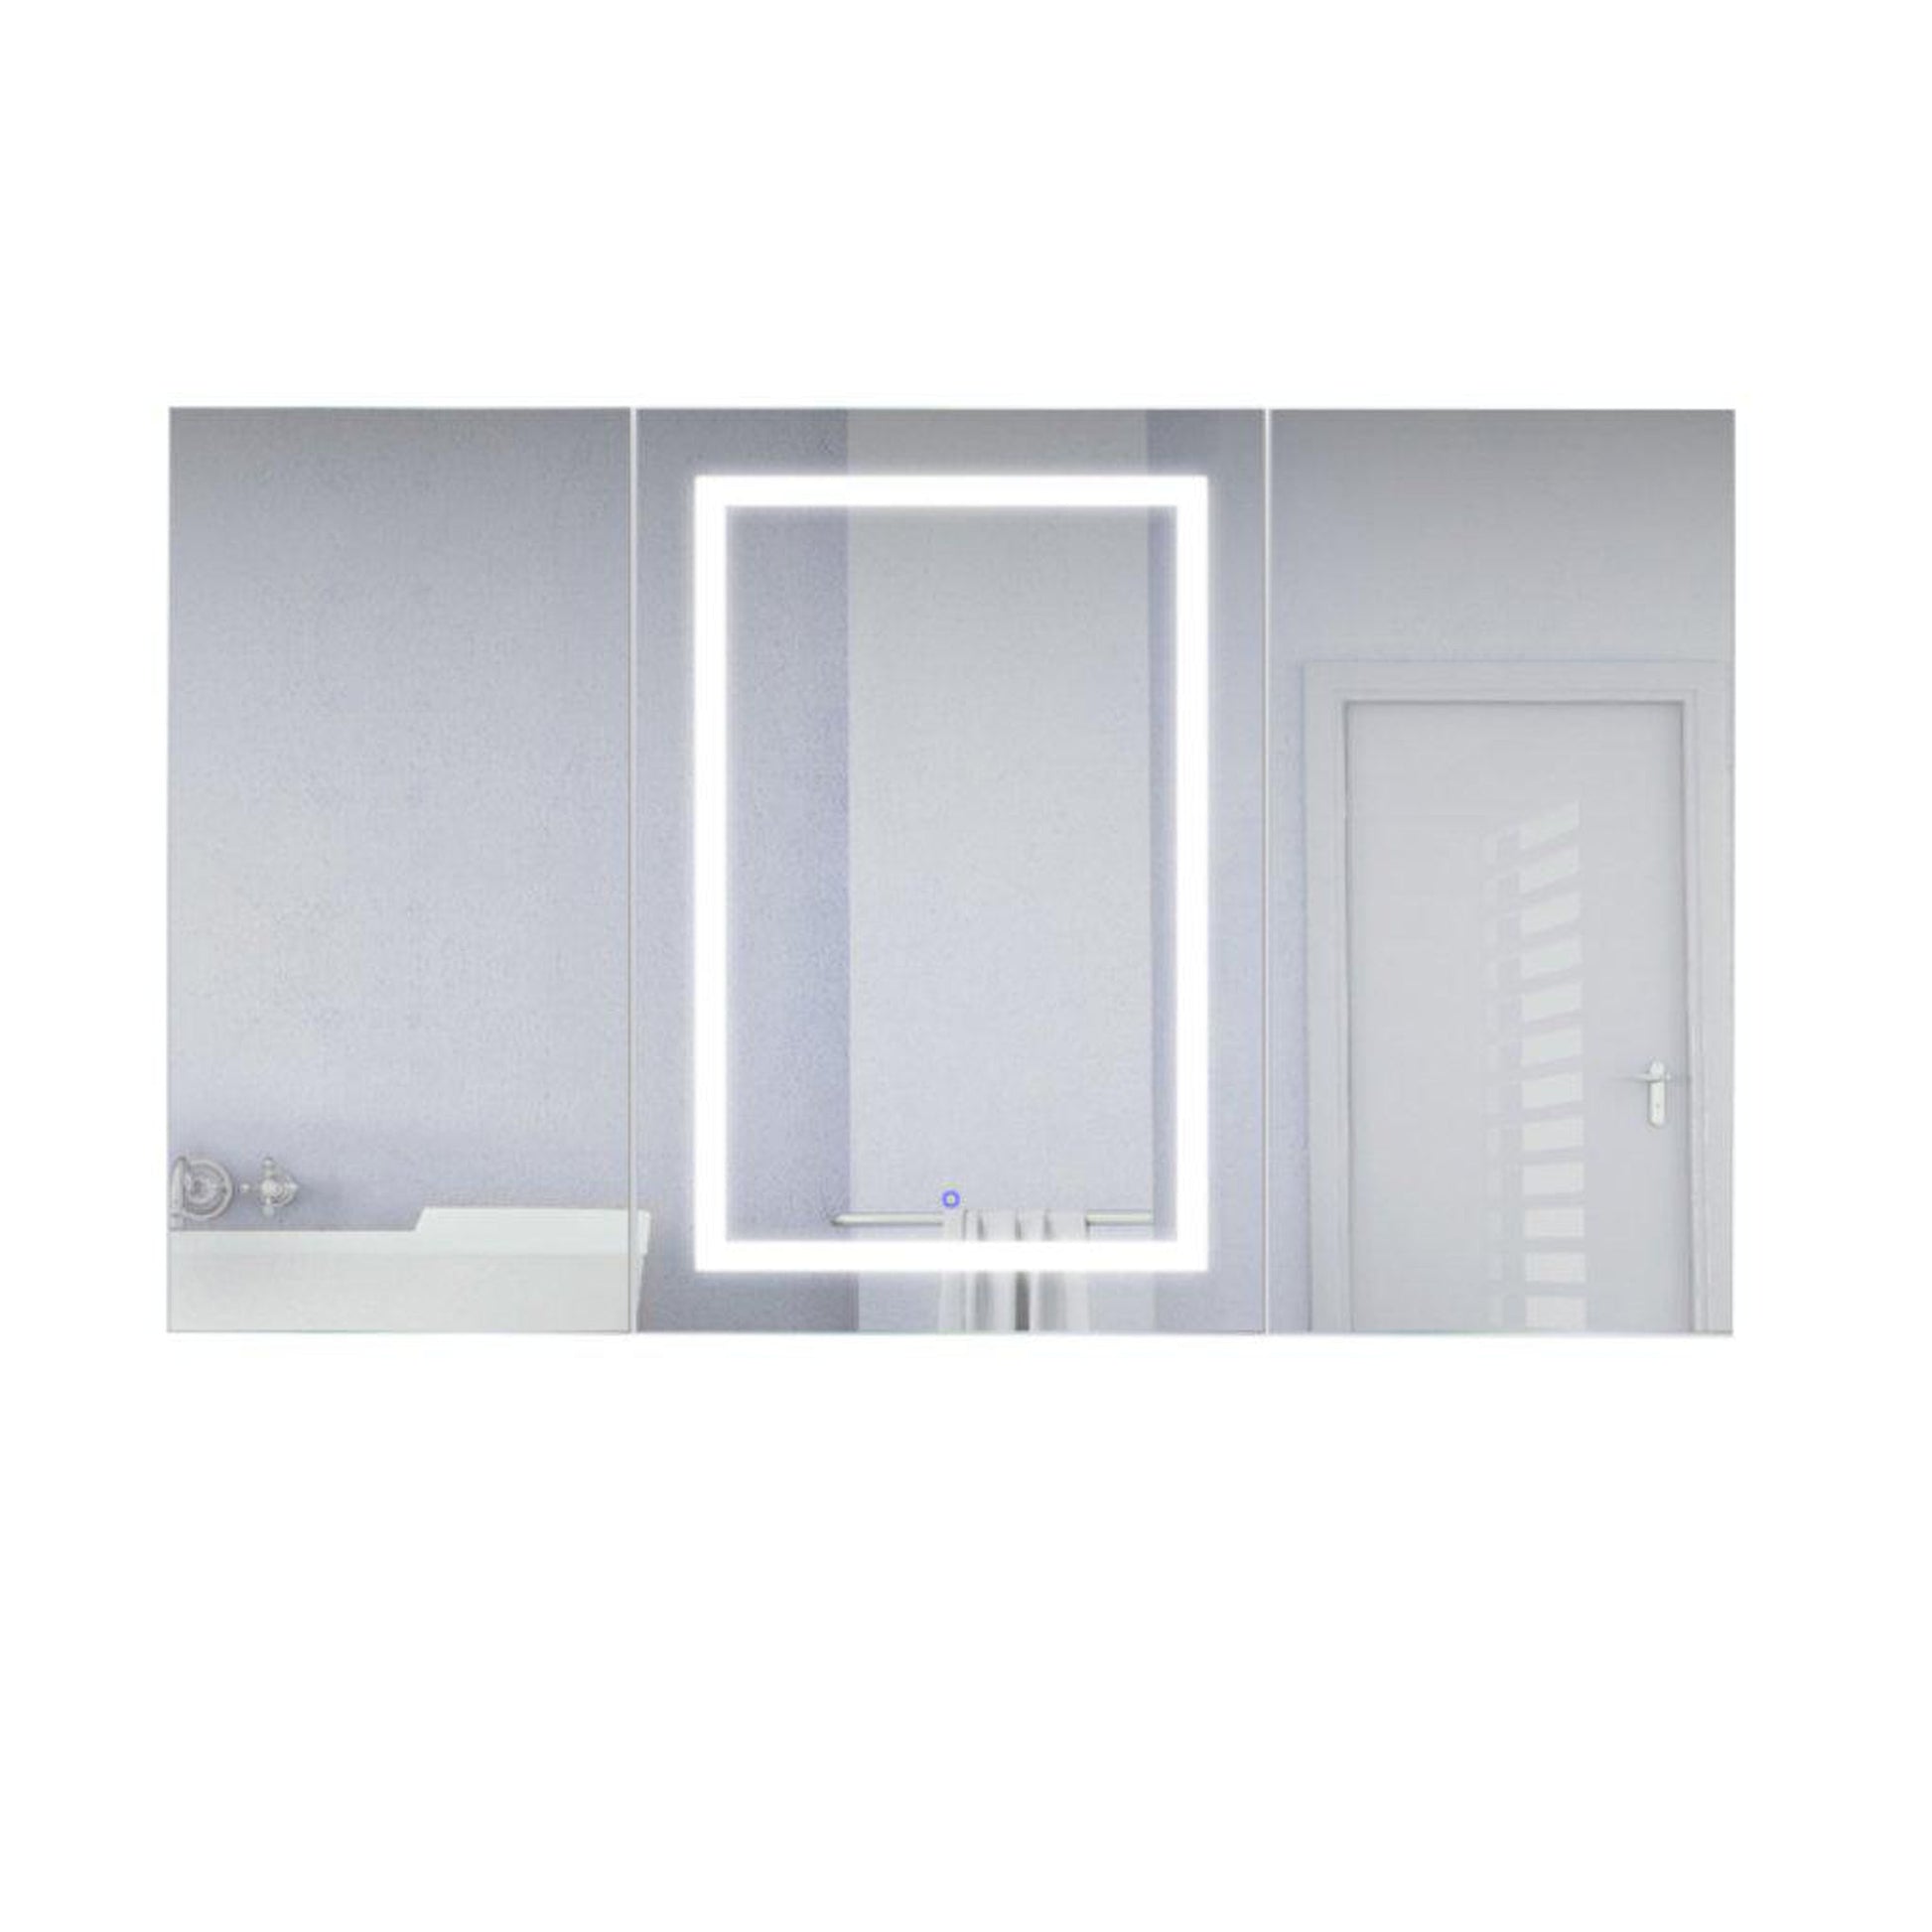 Krugg Reflections Svange 60" x 36" 5000K Single Tri-View Left-Right-Right Opening Recessed/Surface-Mount Illuminated Silver Backed LED Medicine Cabinet Mirror With Built-in Defogger, Dimmer and Electrical Outlet